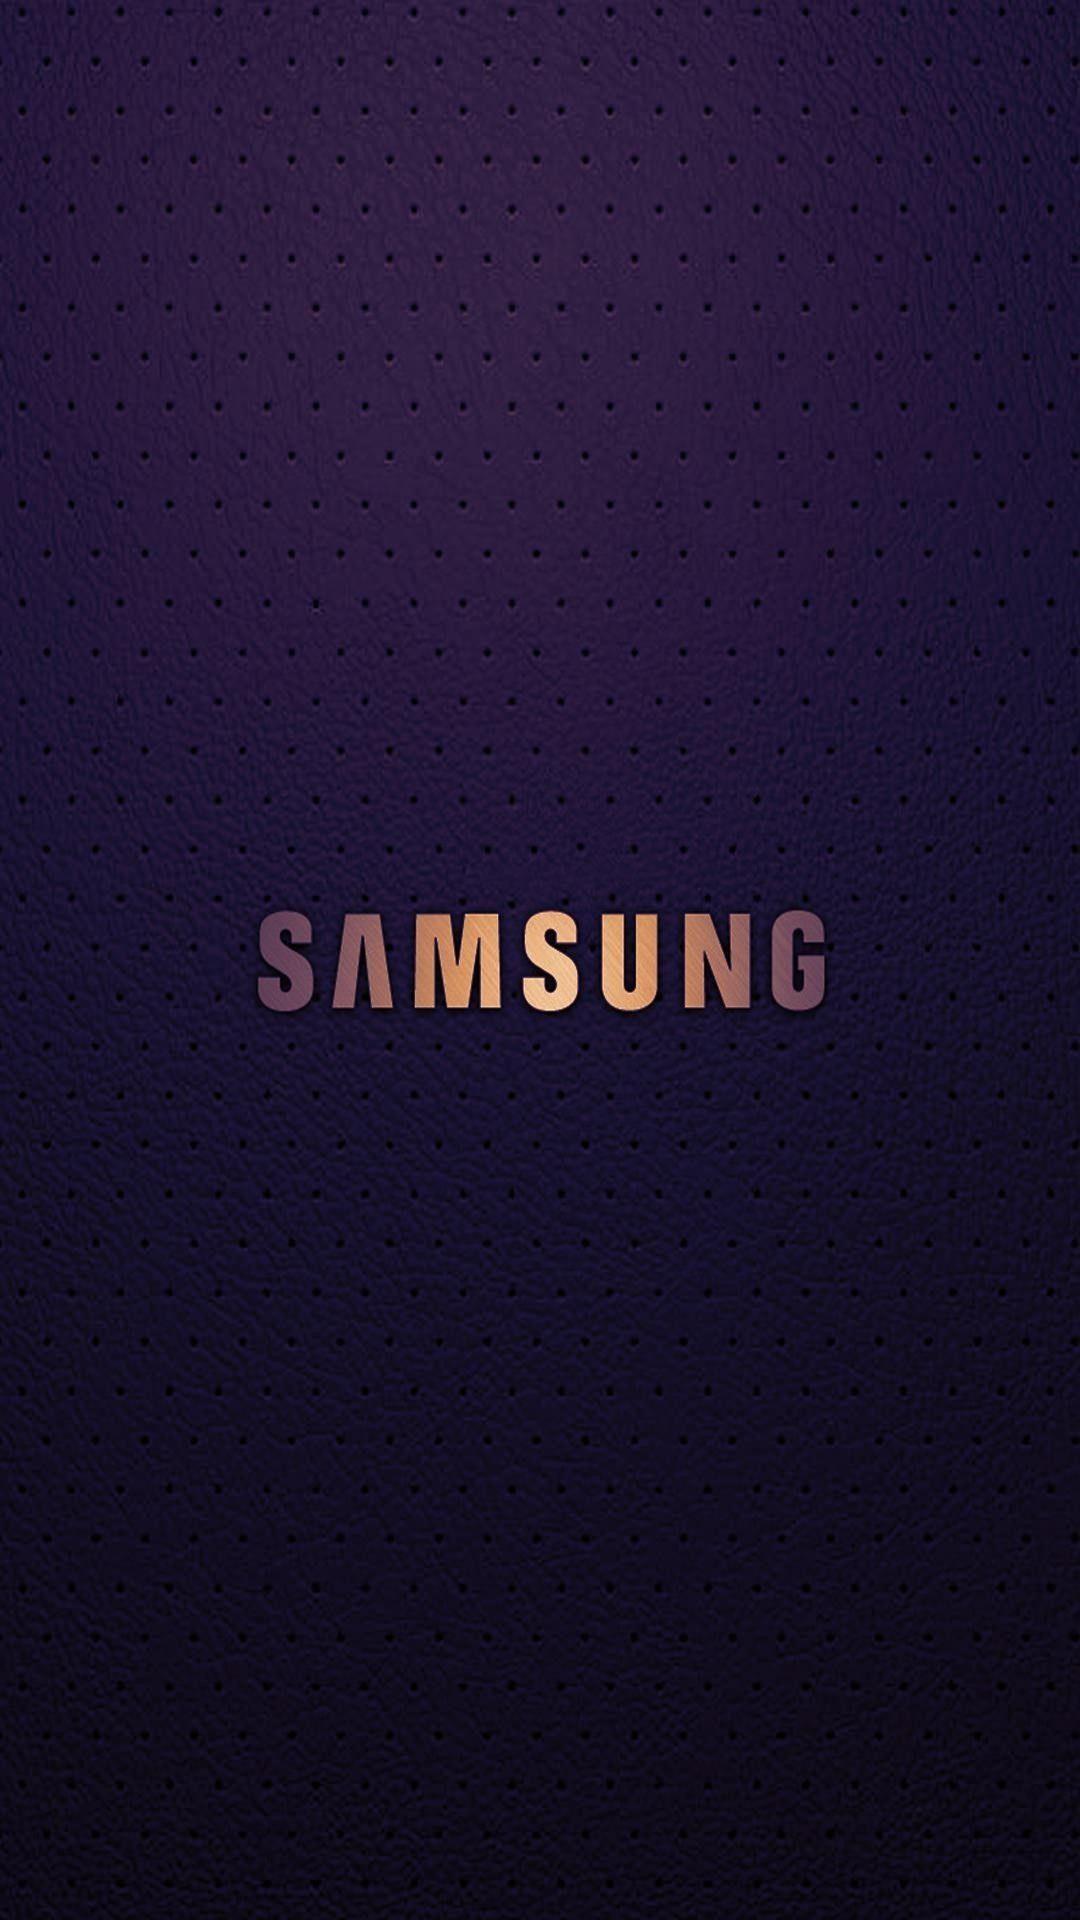 Samsung Galaxy S5 Google Search Wallpaper For Phones HD